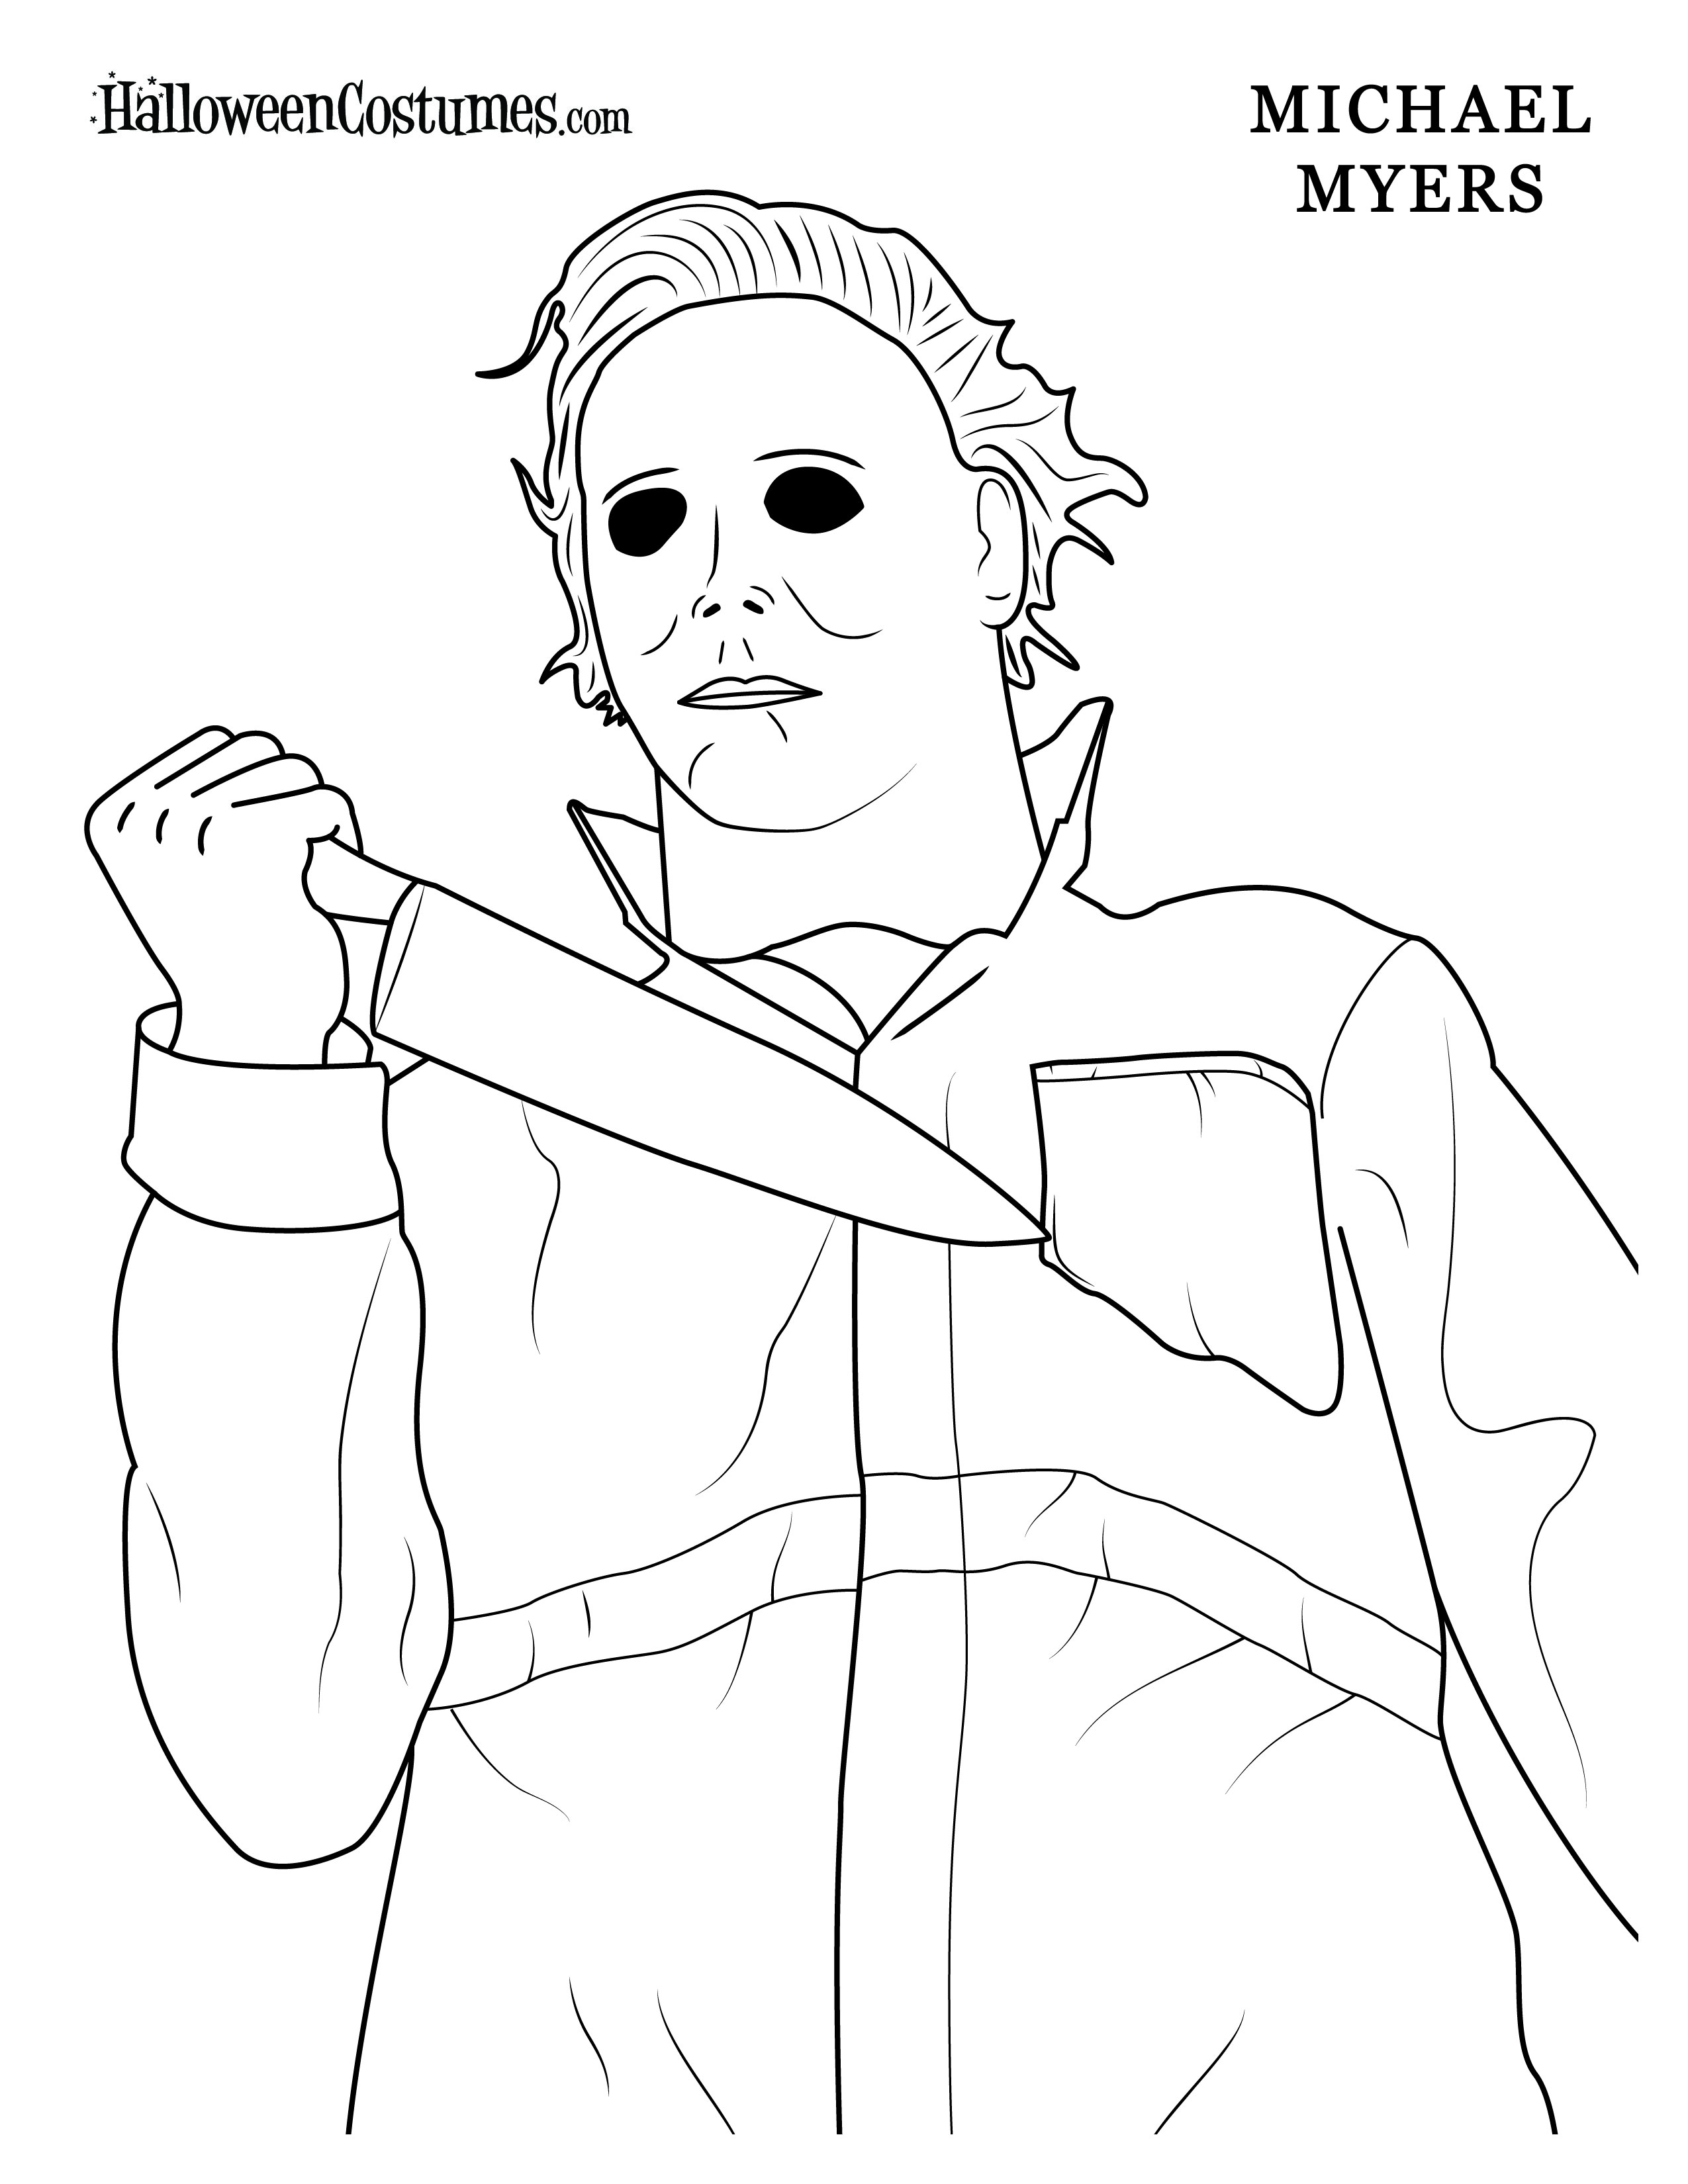 Horror michael myers coloring pages